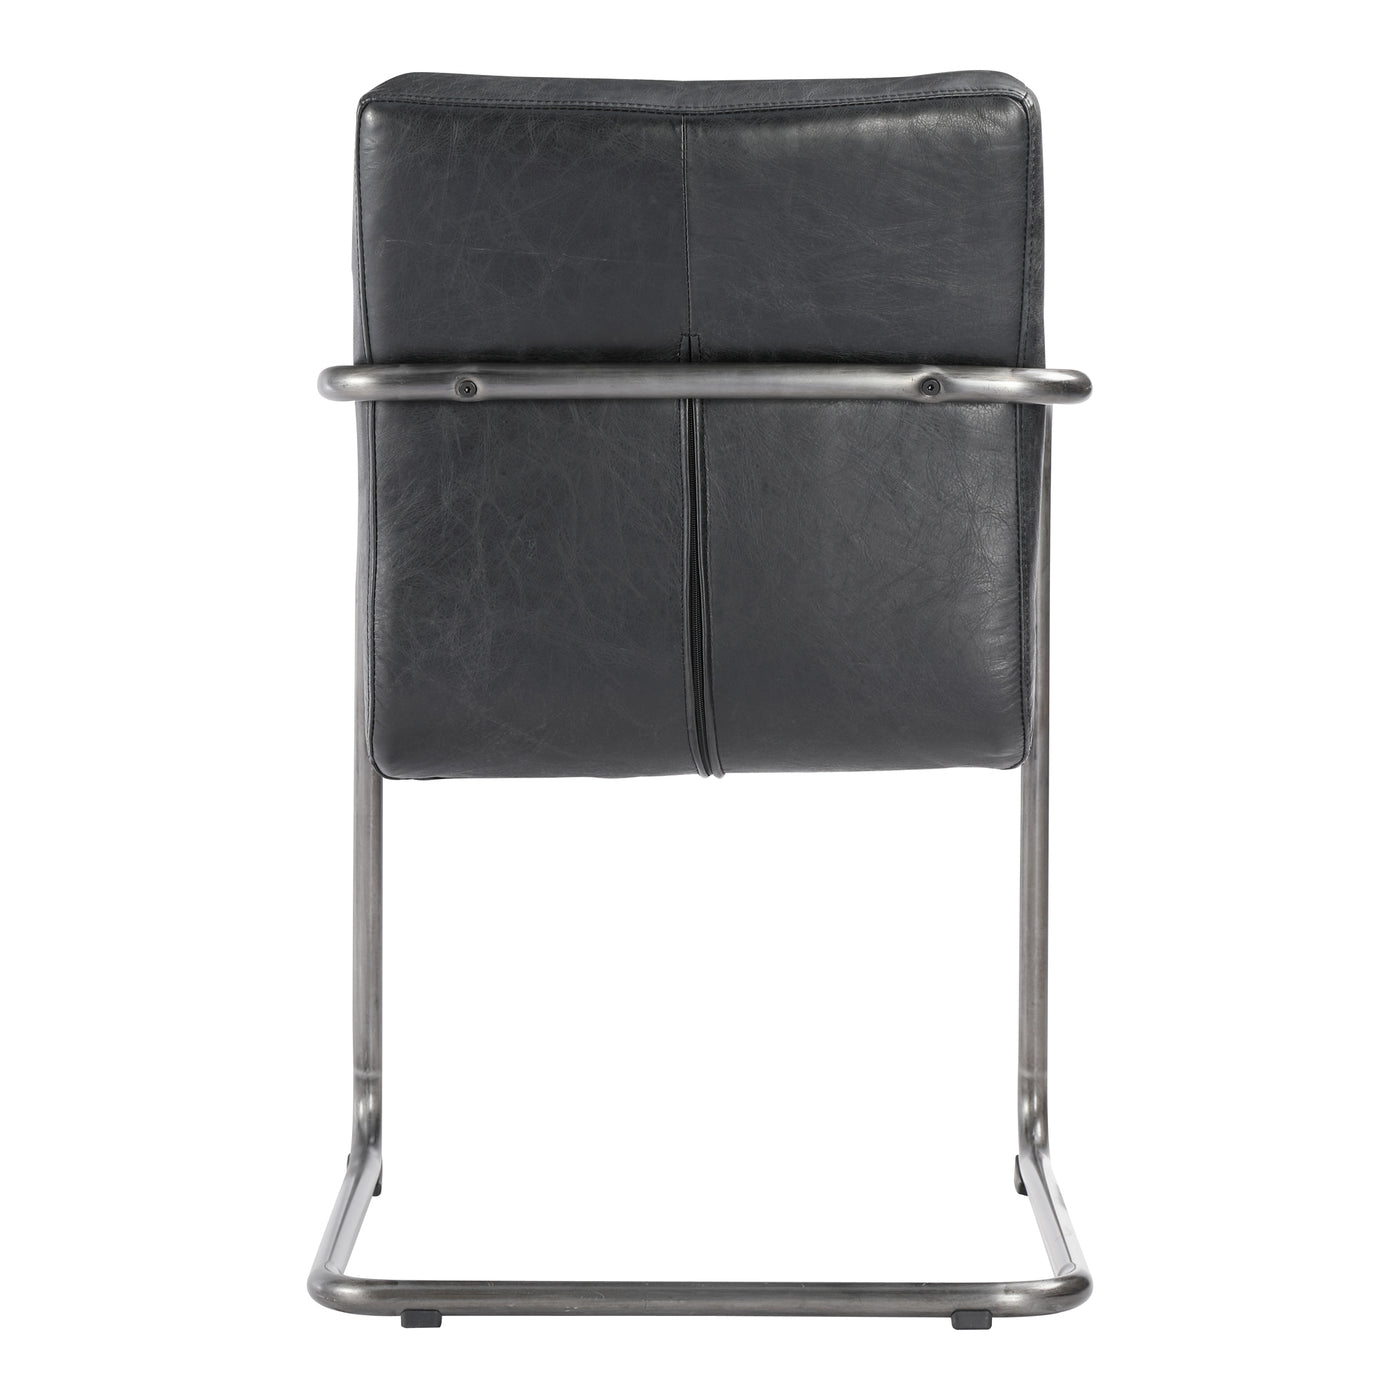 The Ansel dining chair features an industrial iron frame and distressed top grain leather upholstery. The perfect chair fo...